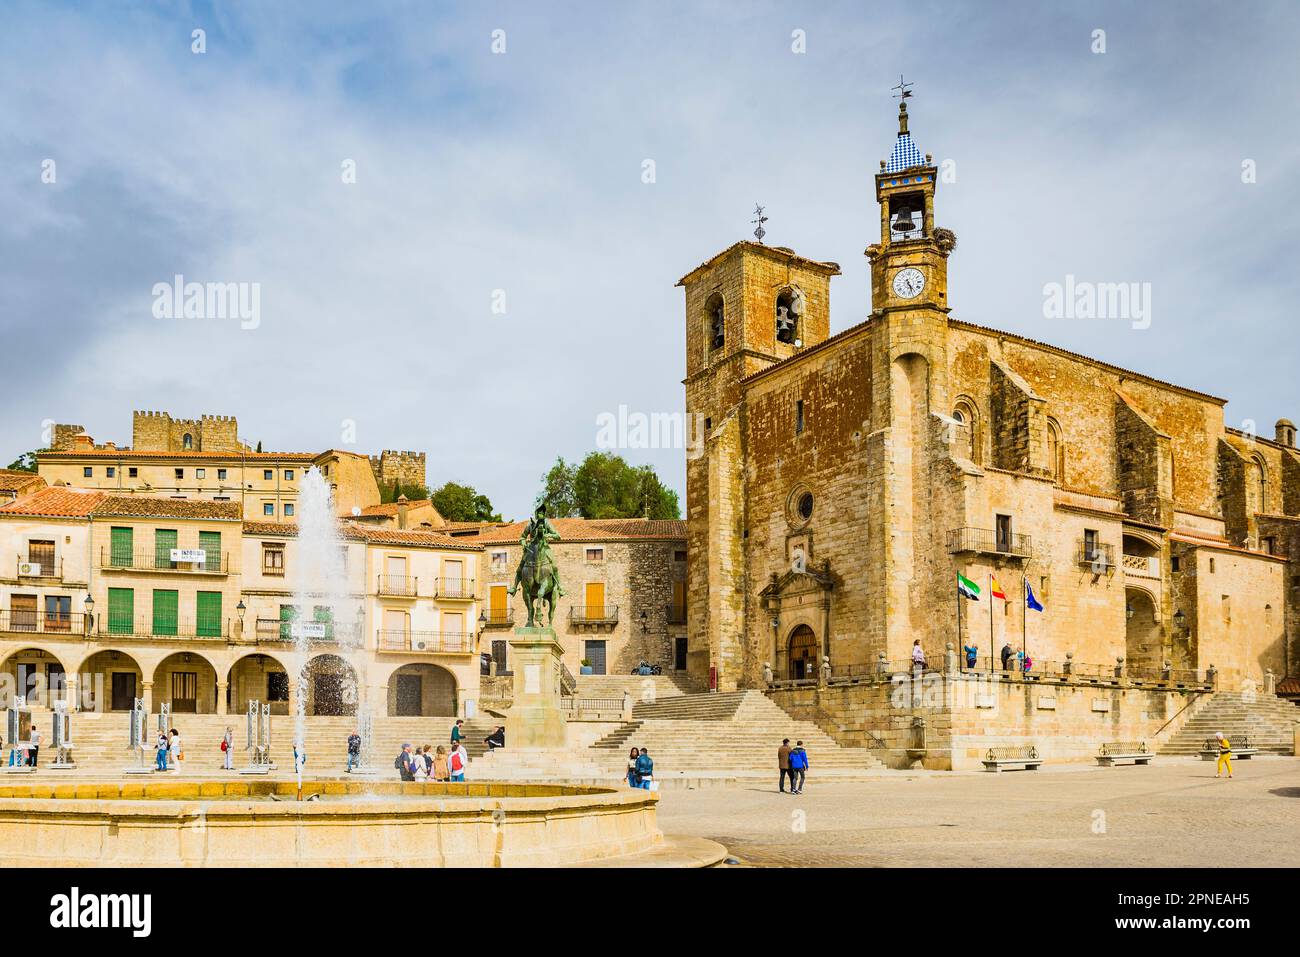 Panoramic view of Plaza Mayor, with San Martin church (R) and arcaded houses (L). Trujillo, Cáceres, Extremadura, Spain, Europe Stock Photo